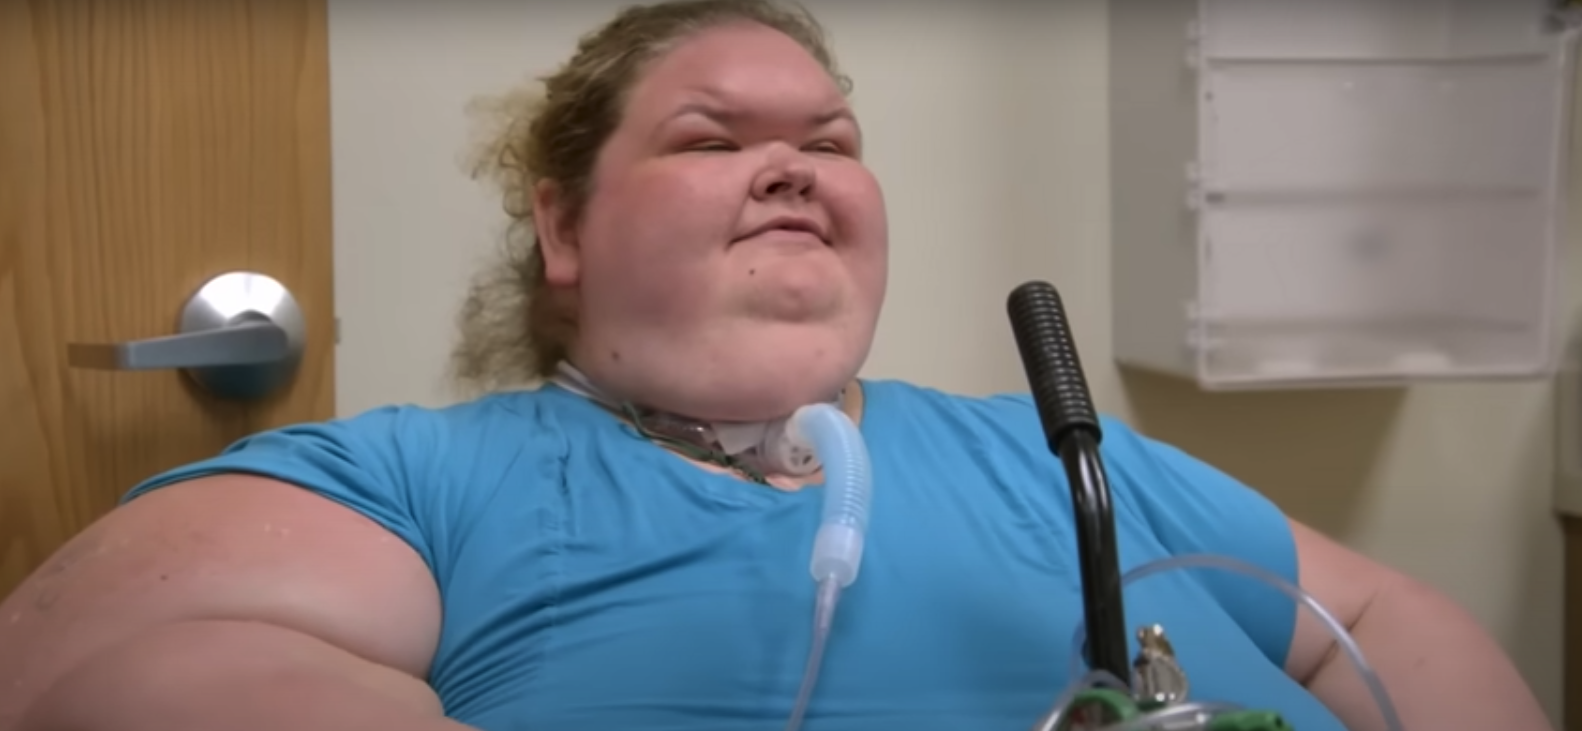 '1000-lb Sisters' star Tammy Slaton in an episode of the TLC show 